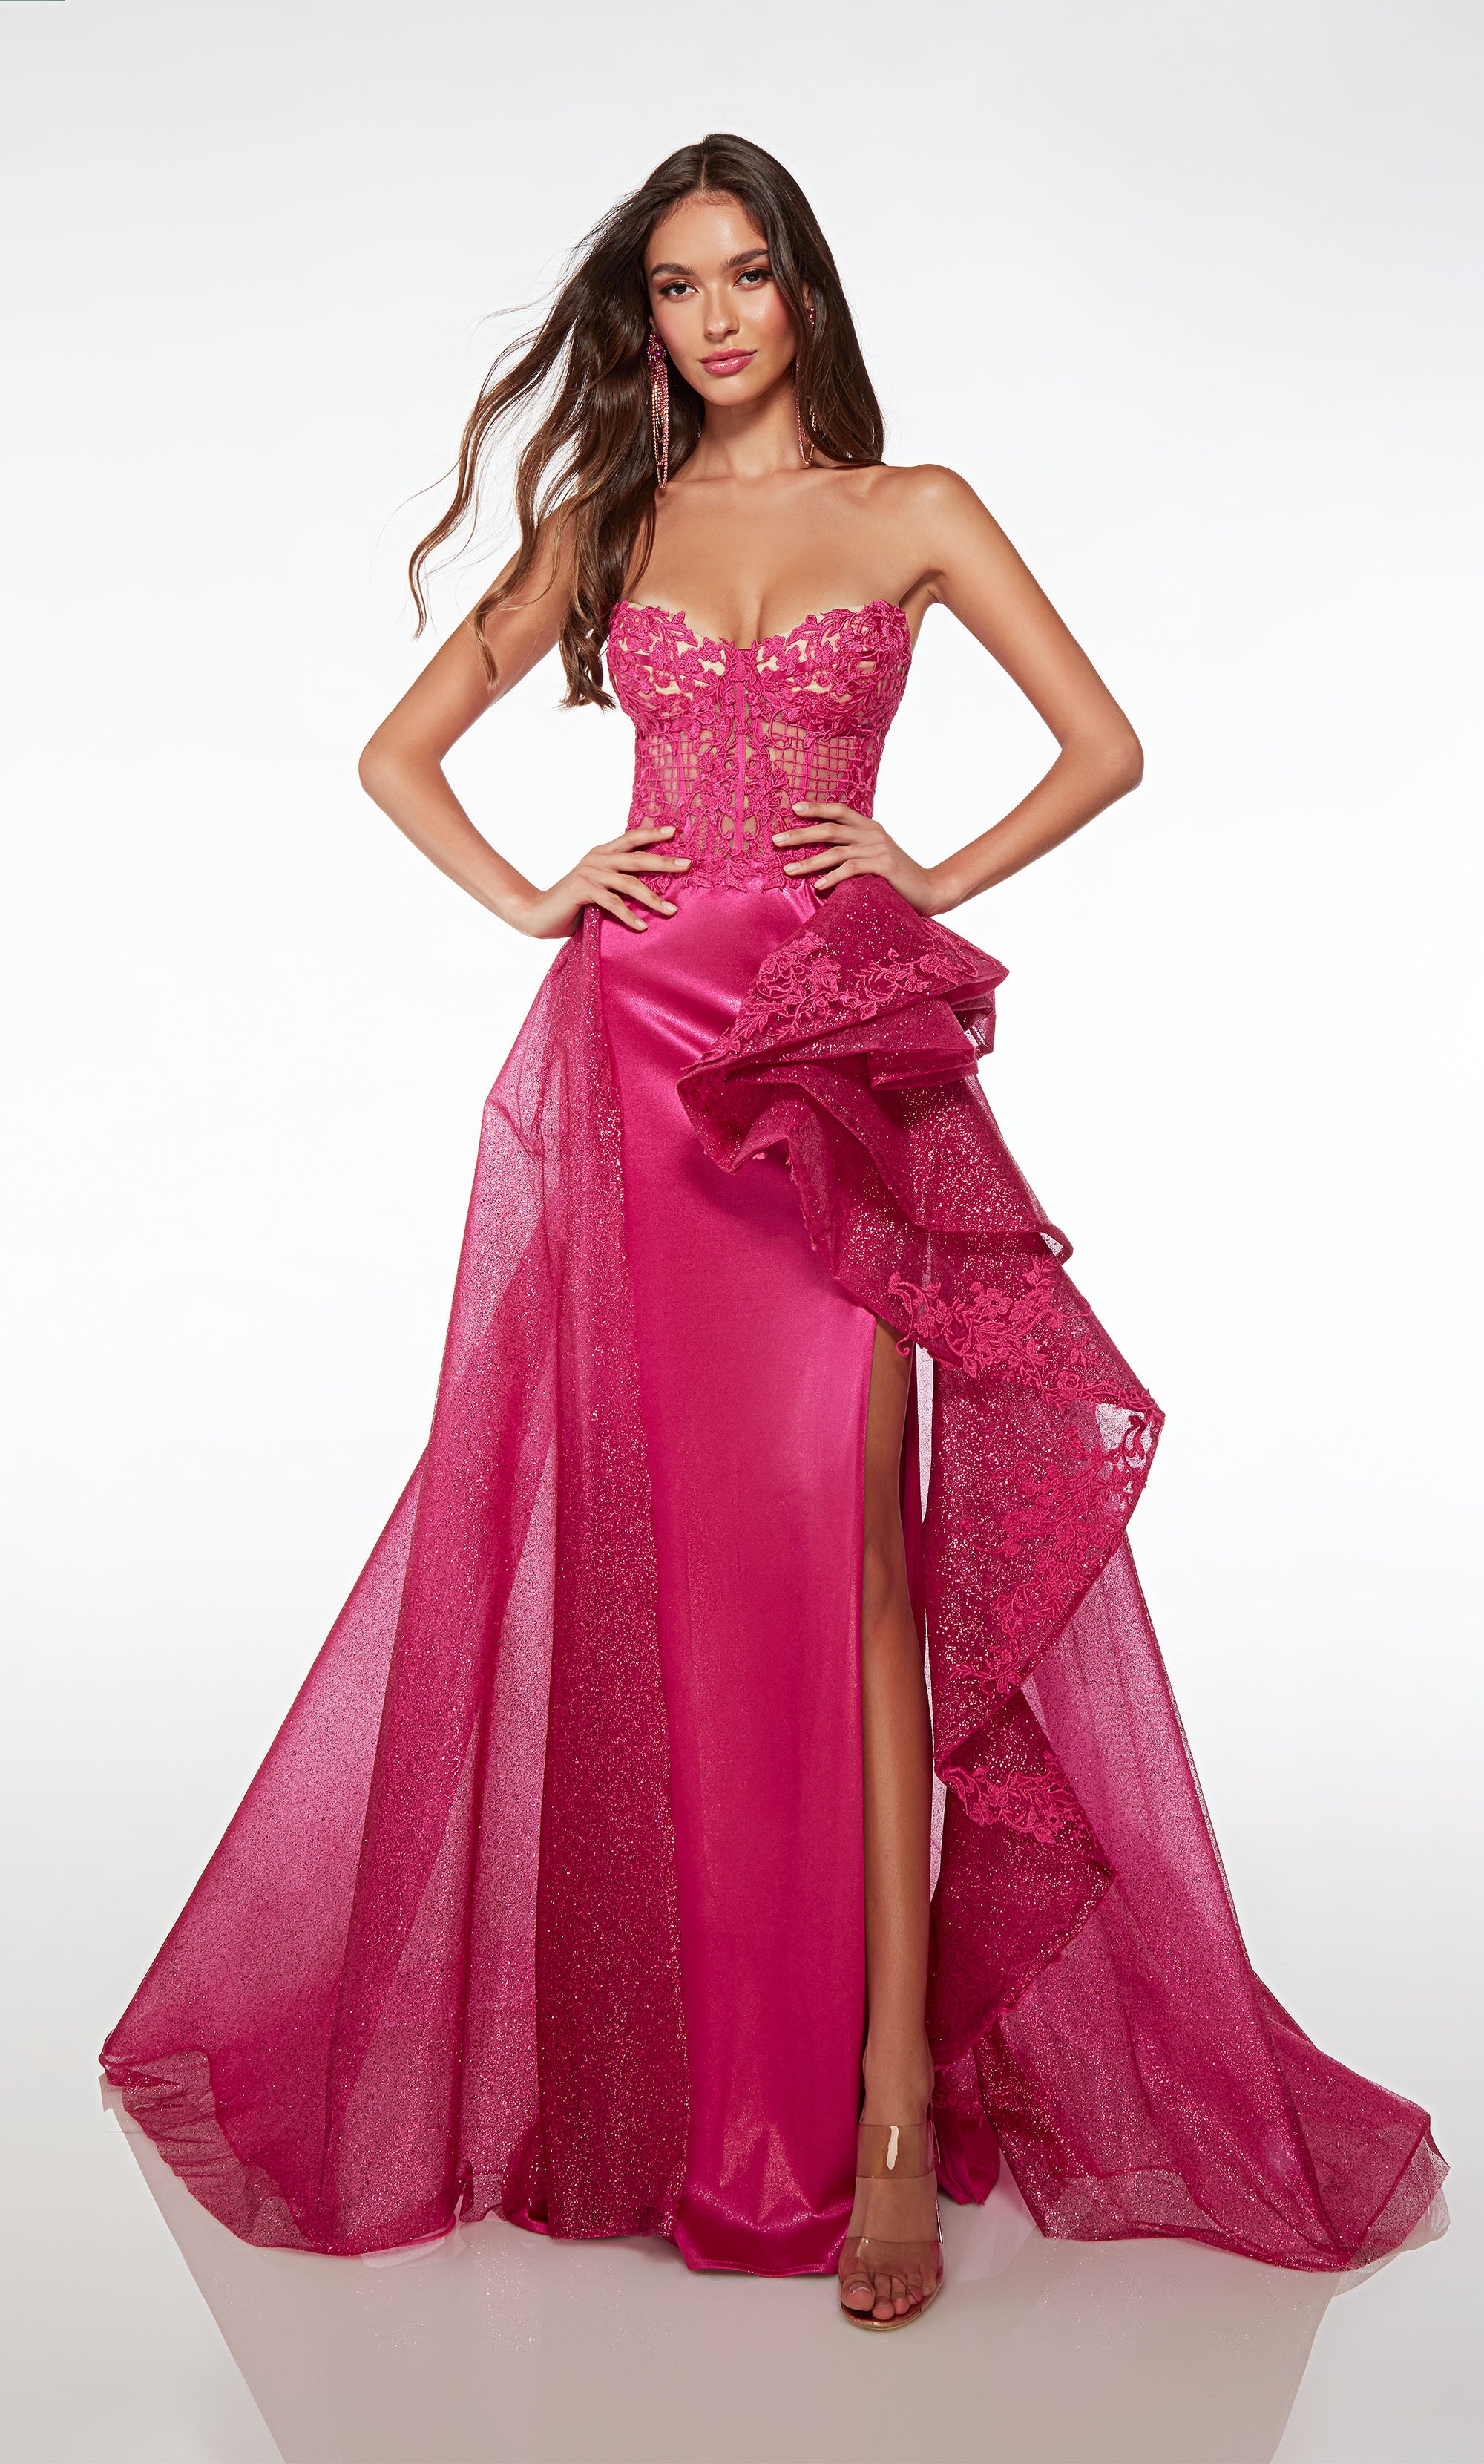 Chic strapless pink pageant dress featuring an lace corset top, high side slit, and an dramatic ruffled detachable skirt for added flair.